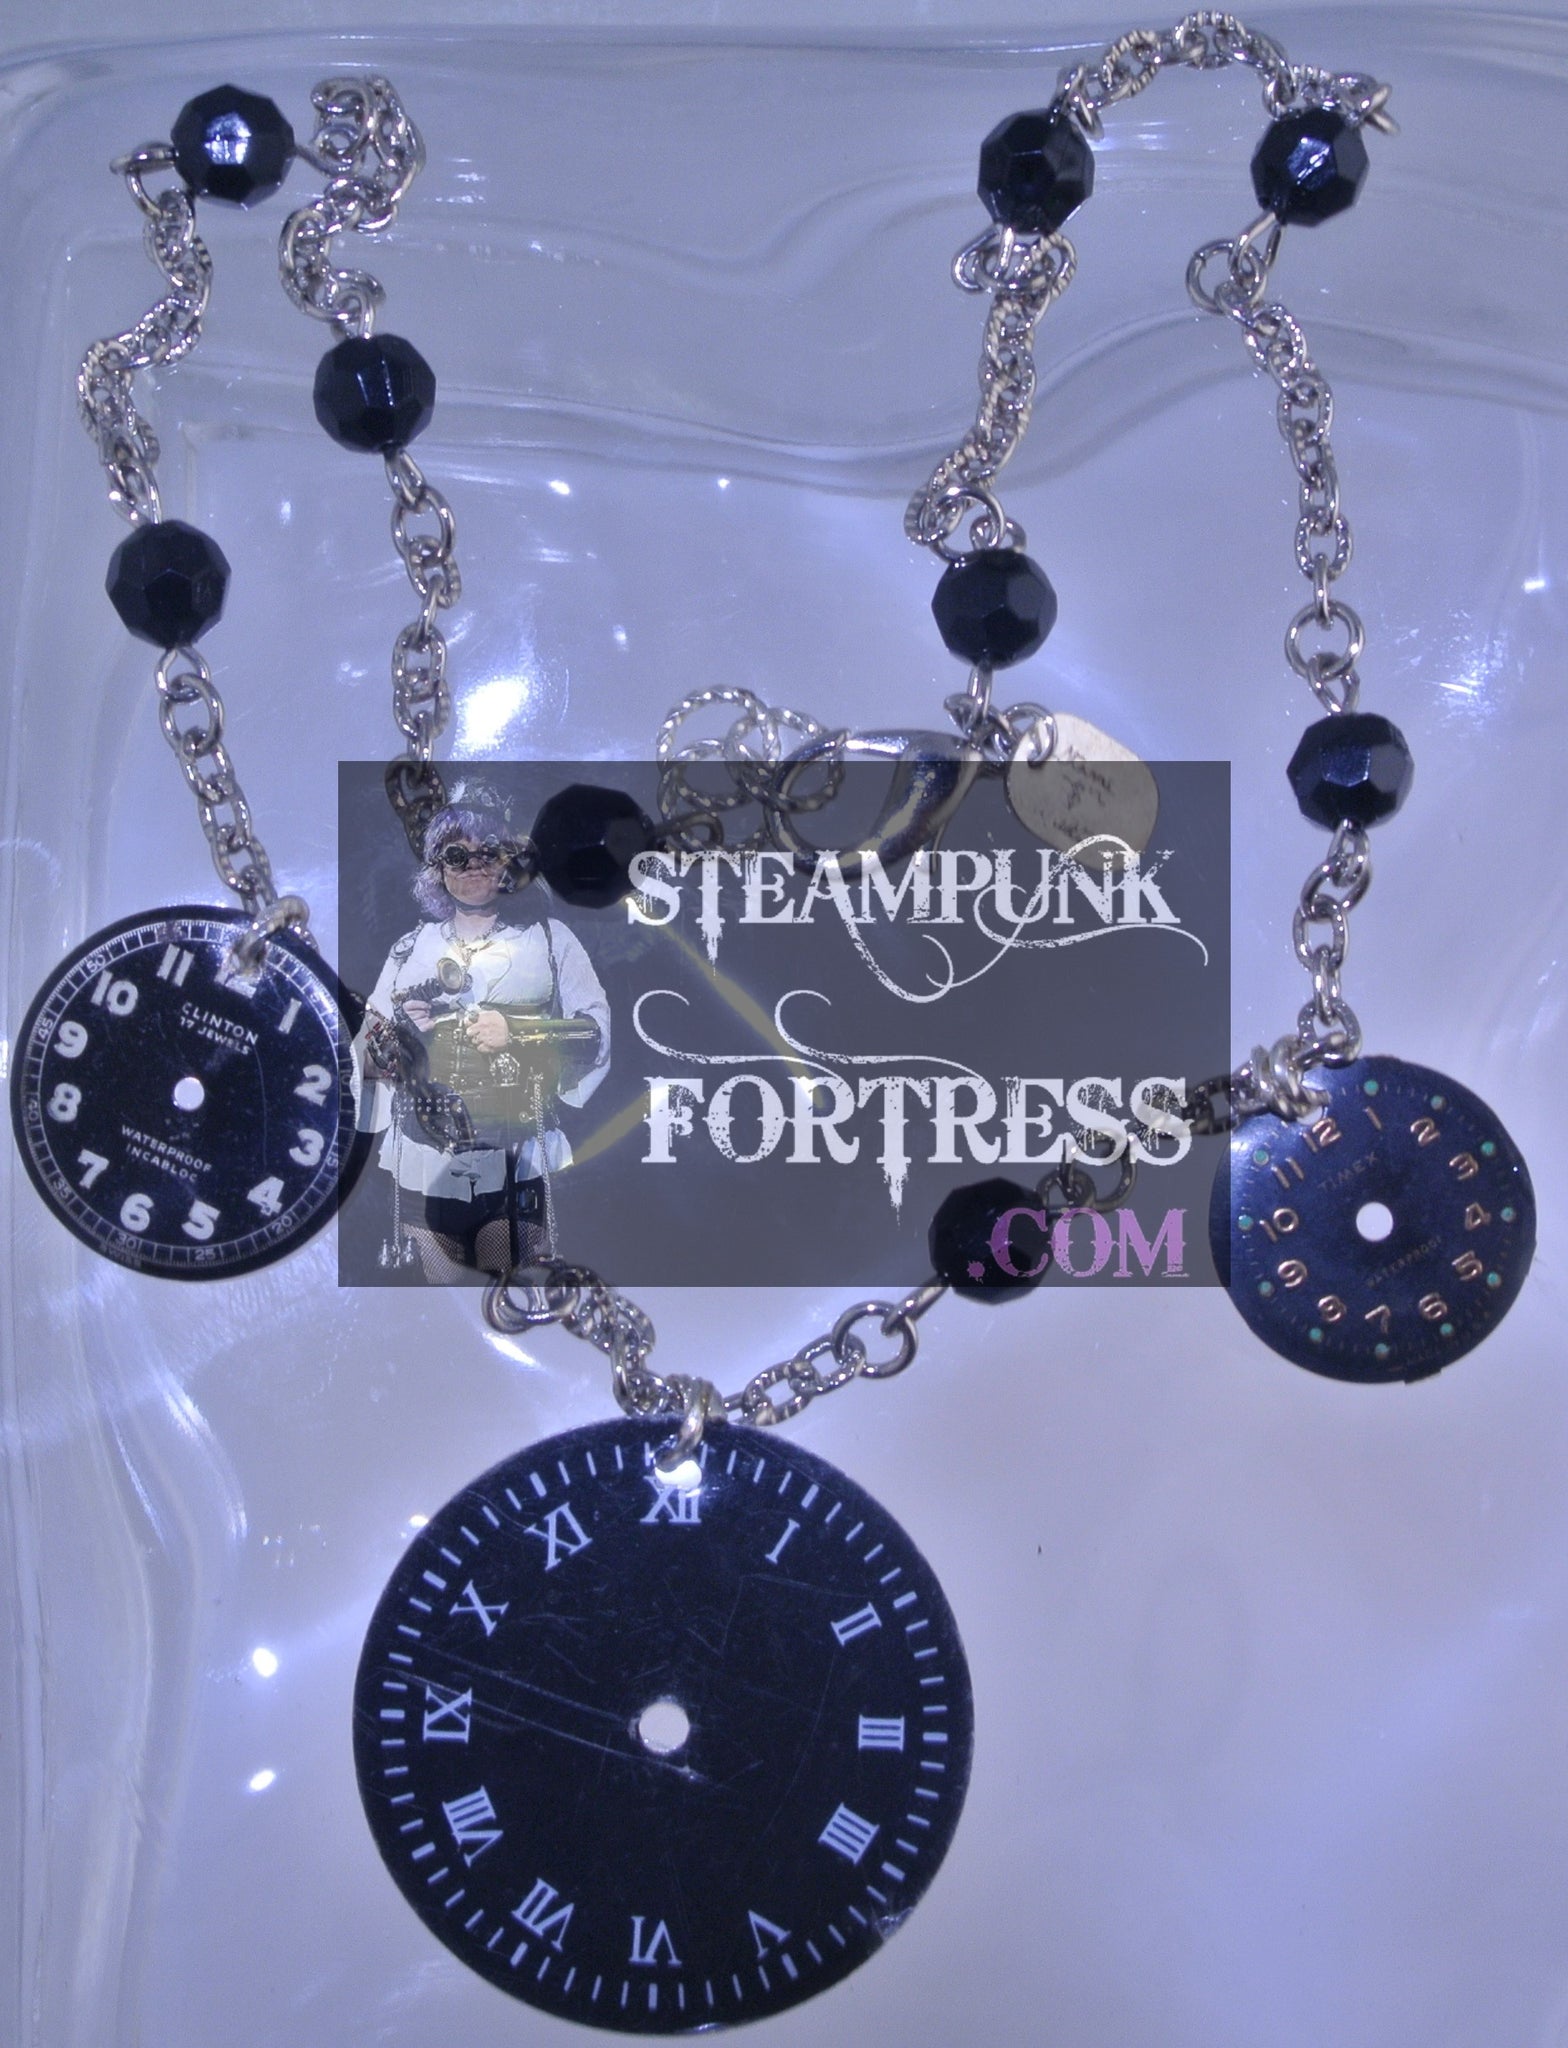 SILVER FACE 3 BLACK AUTHENTIC GENUINE WATCH CLOCK FACE DIALS BLACK CRYSTAL NECKLACE STARR WILDE STEAMPUNK FORTRESS